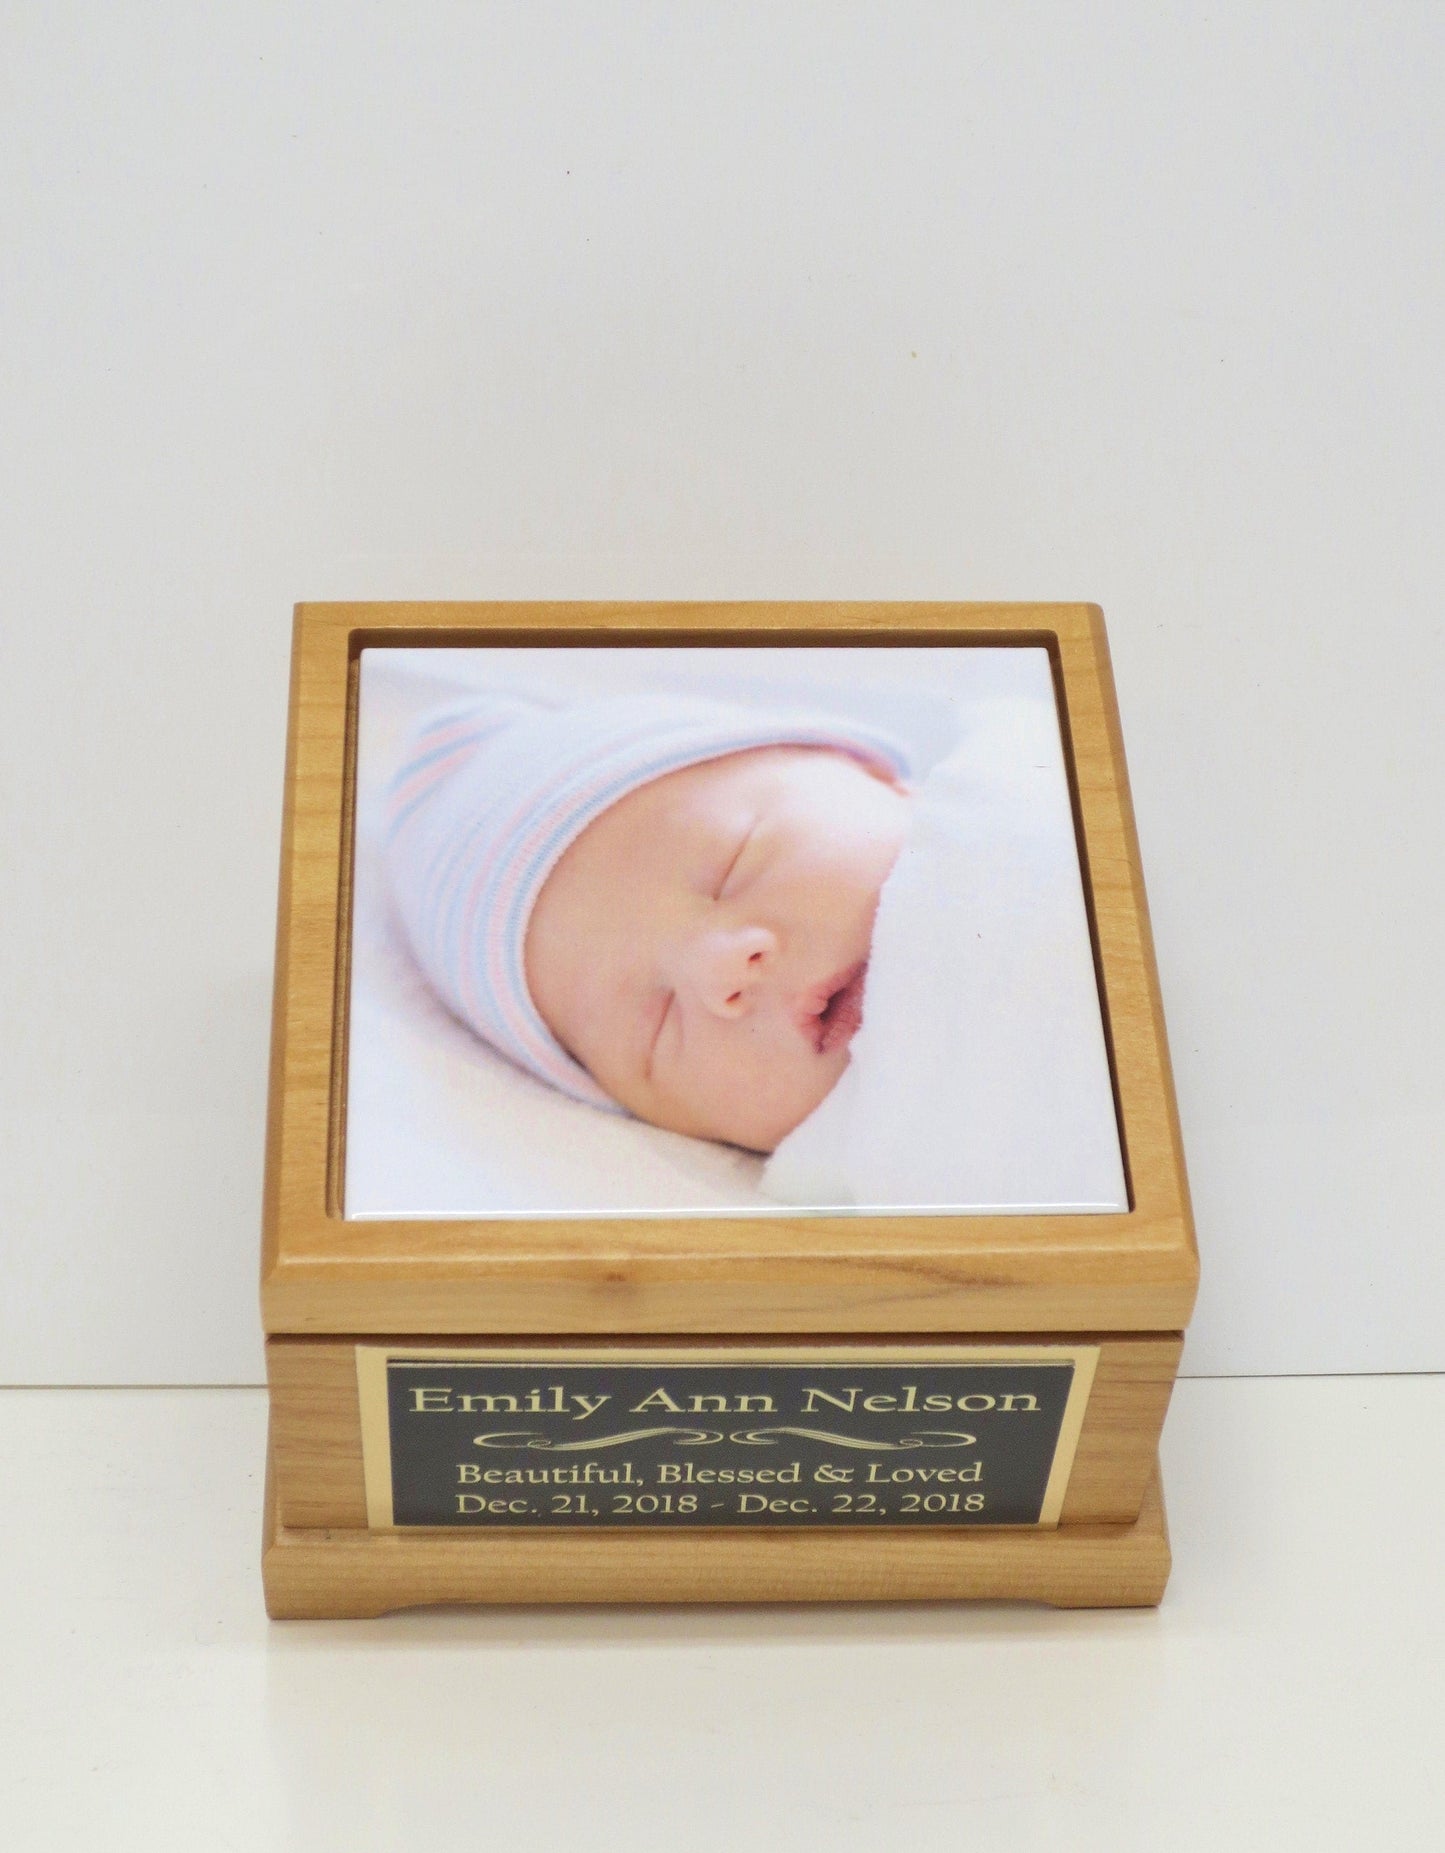 Baby Urn For Ashes Infant Child Urn Baby Cremation Memorial Human Tile Photo & Personalized Engraved Tag Memorial Keepsake Red Alder 25 lbs